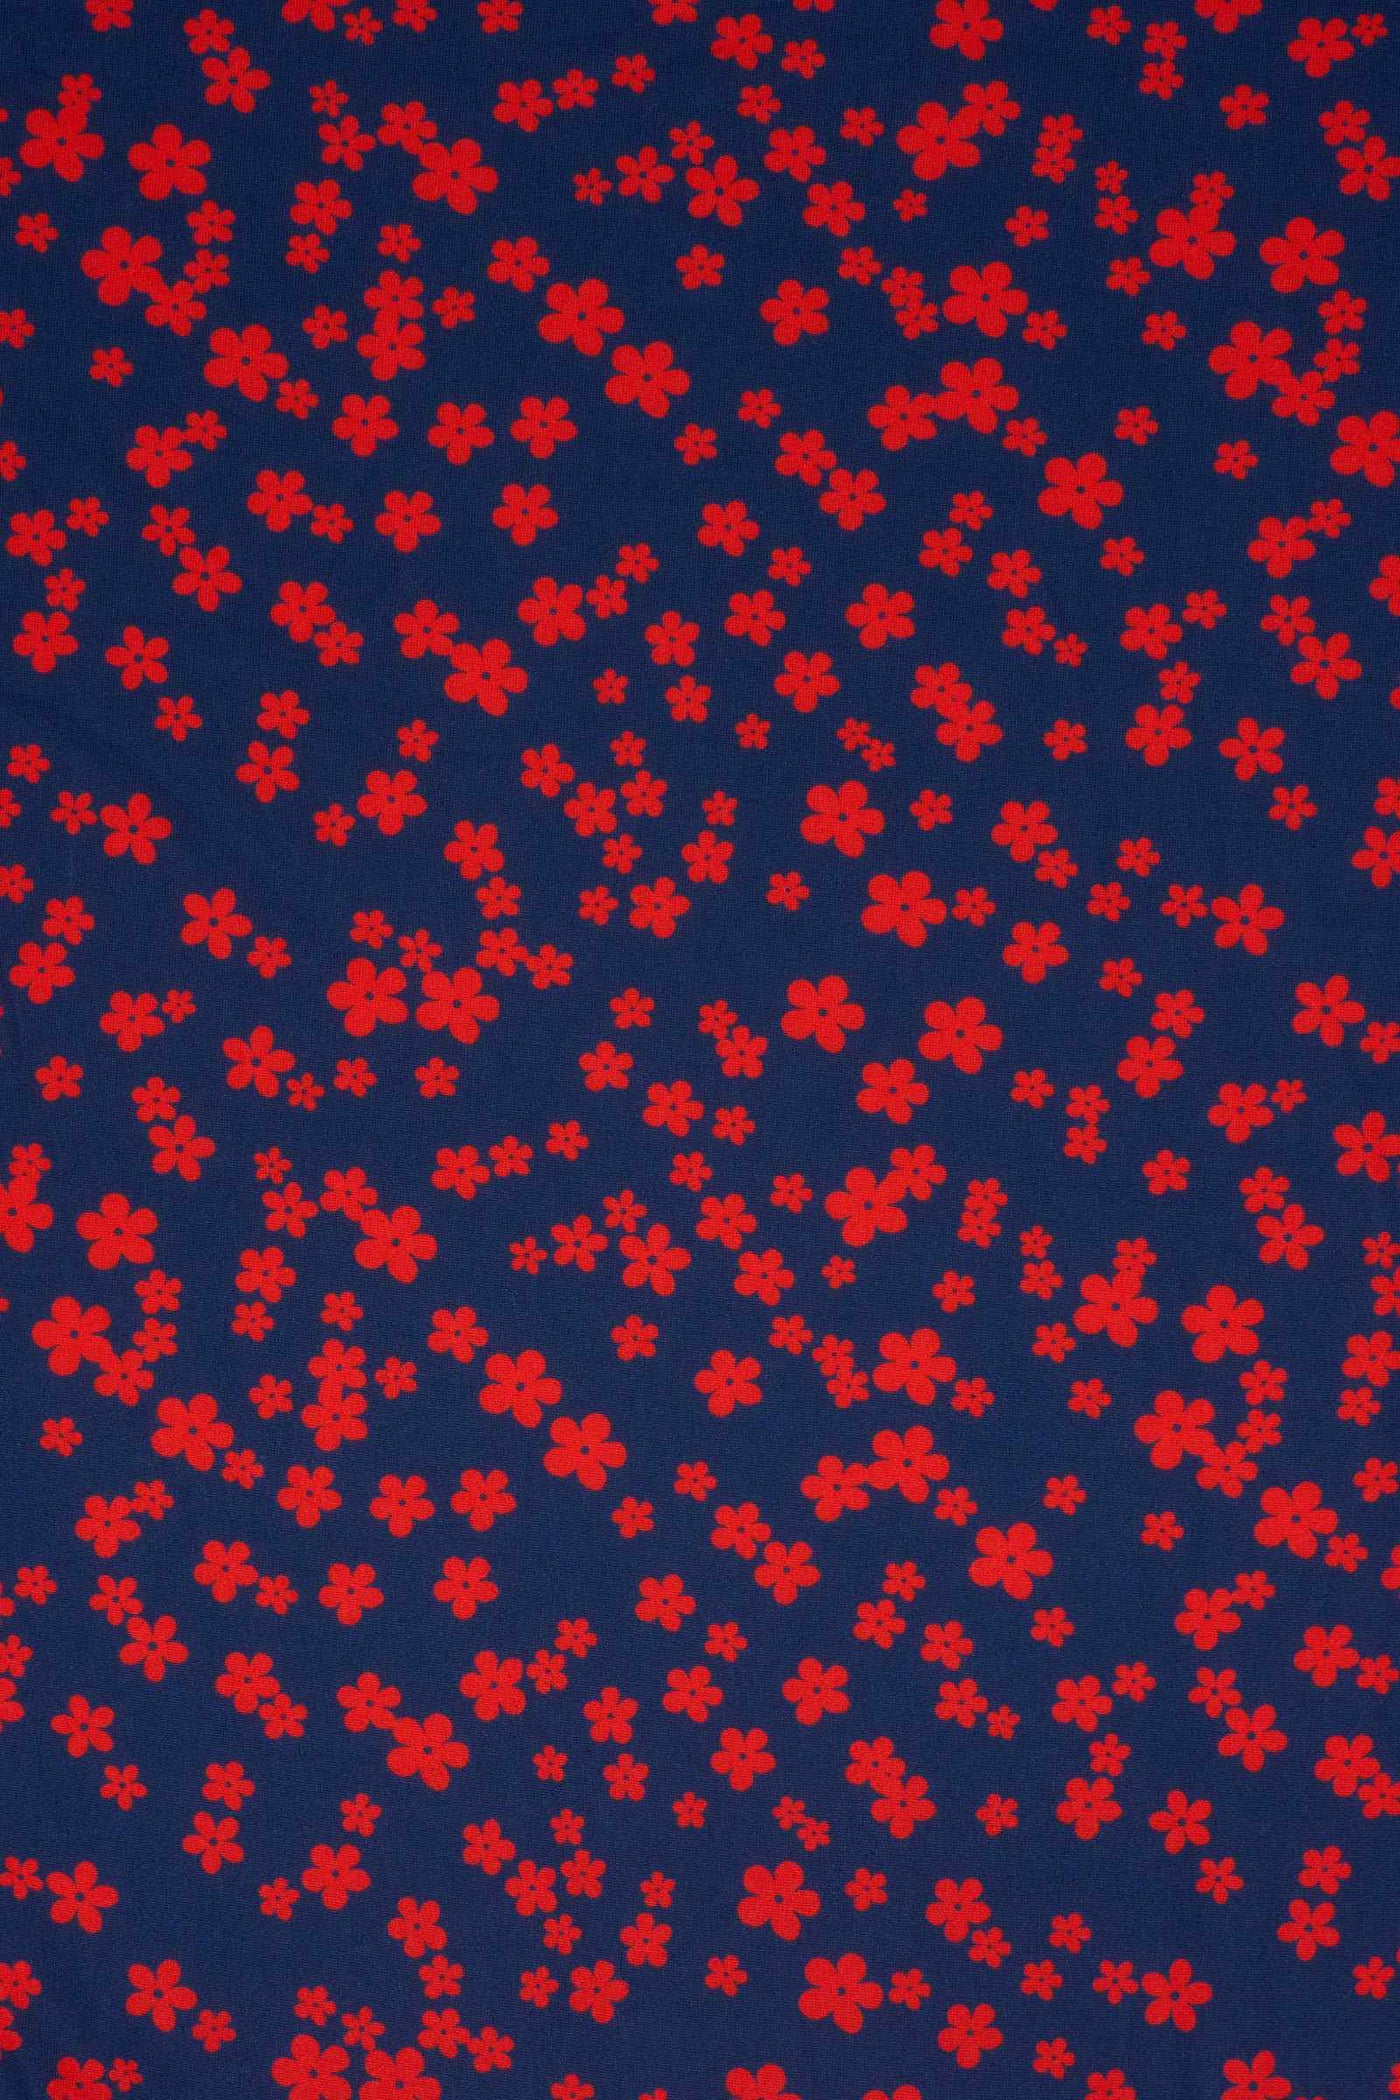 Close up View of Red Ditsy Floral Petal Print Sleeve Dress in Navy Blue